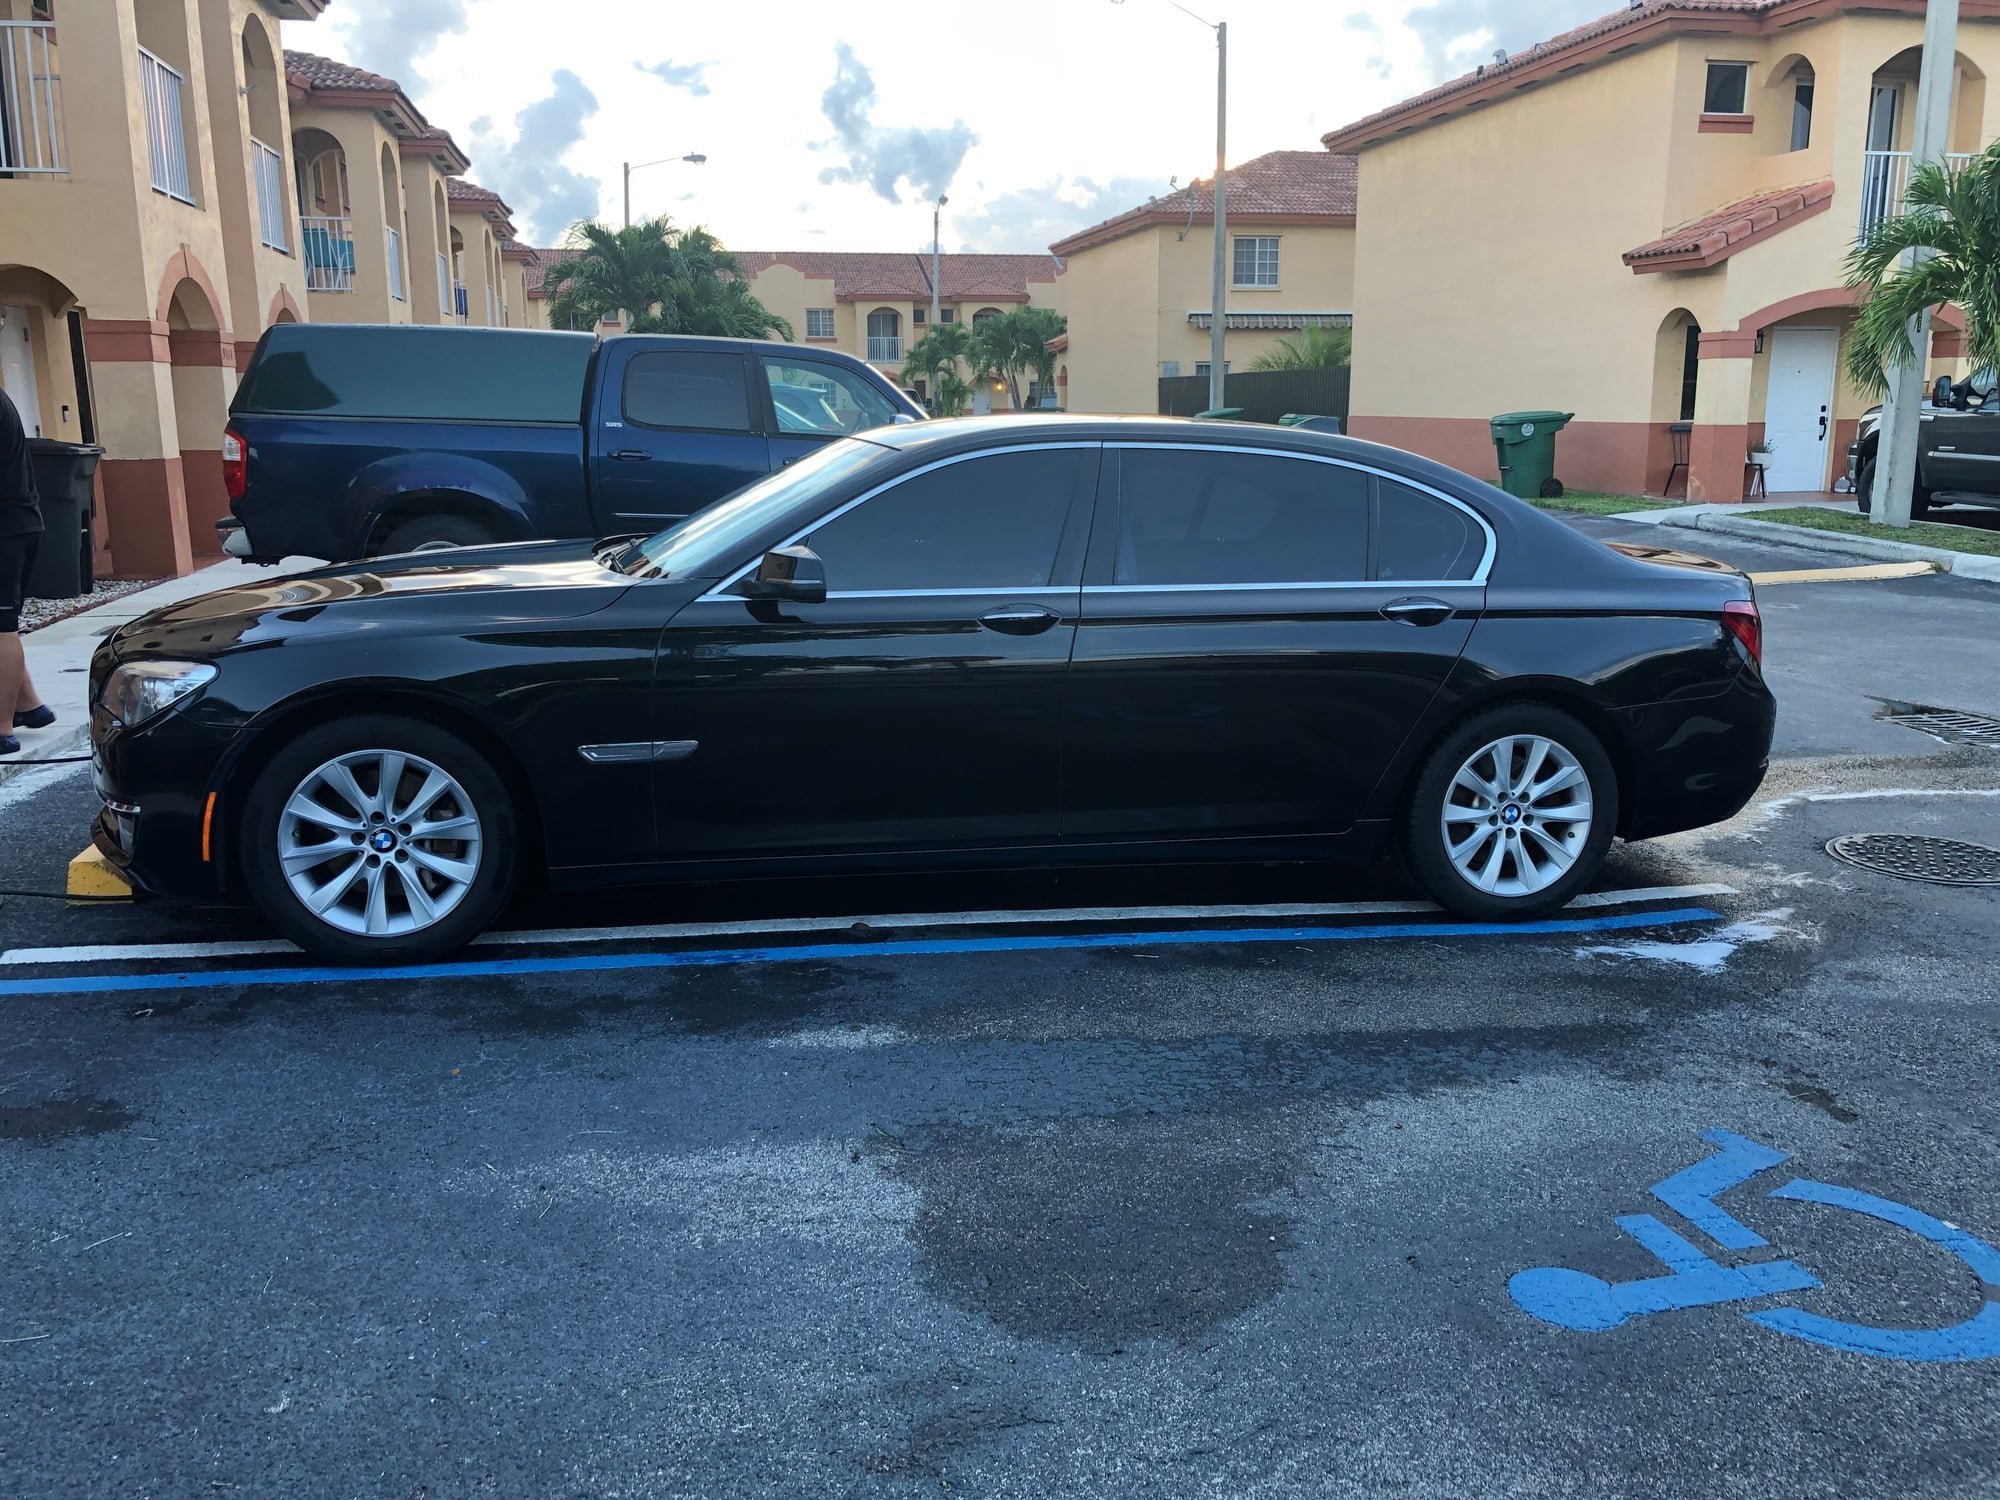 2013 BMW 740Li For Sale - The Hull Truth - Boating and Fishing Forum